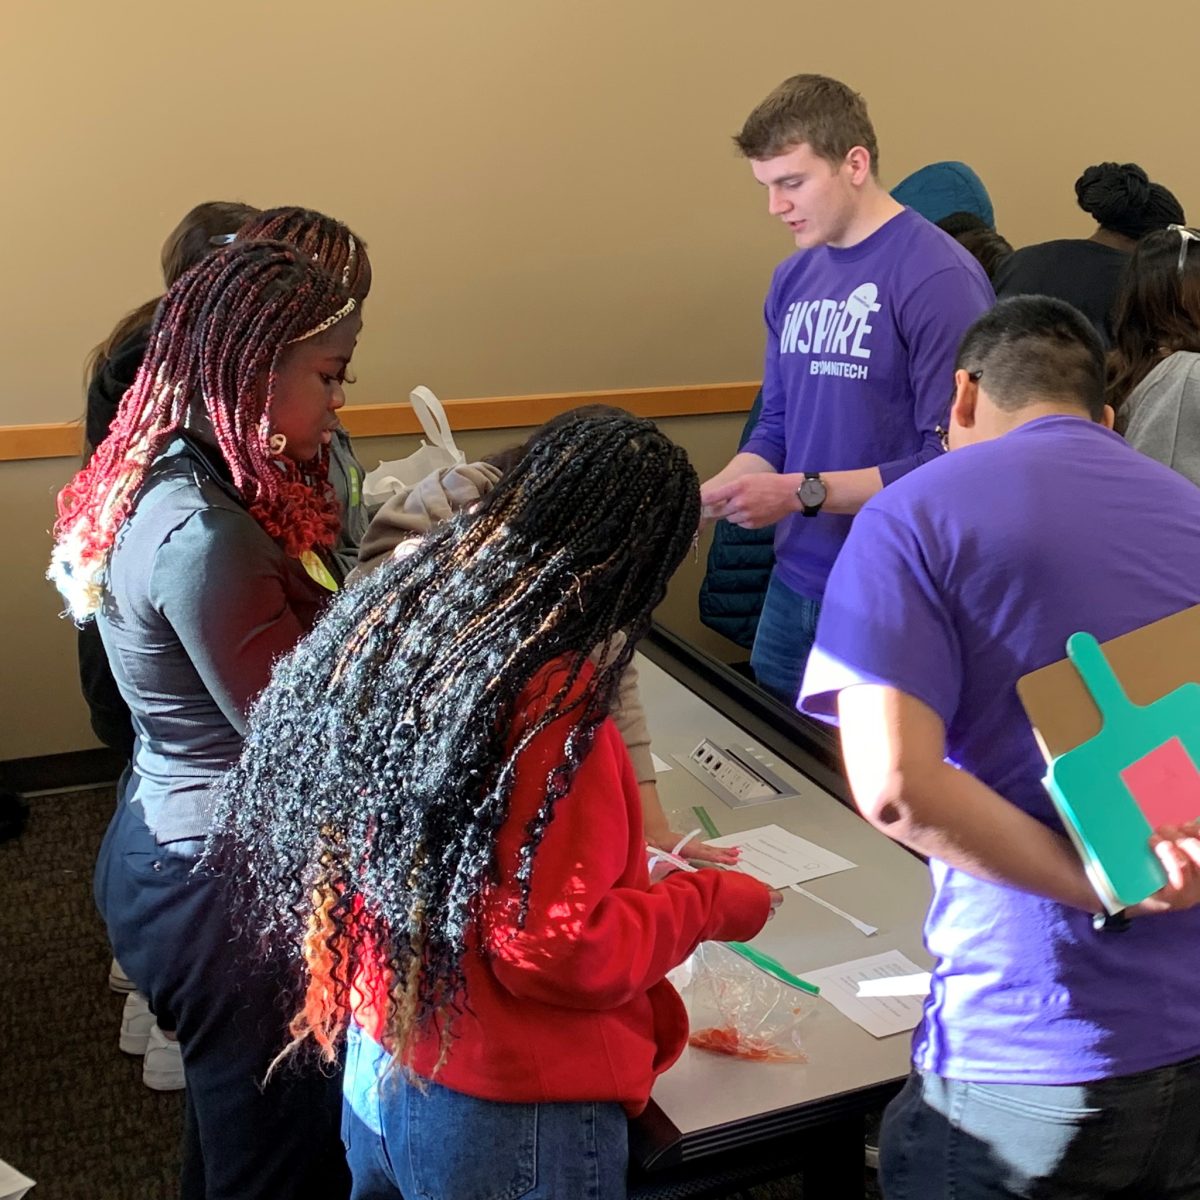 Students took part in the iNSPiRE by Omnitech workshop at the USD Sioux Falls campus on March 17.